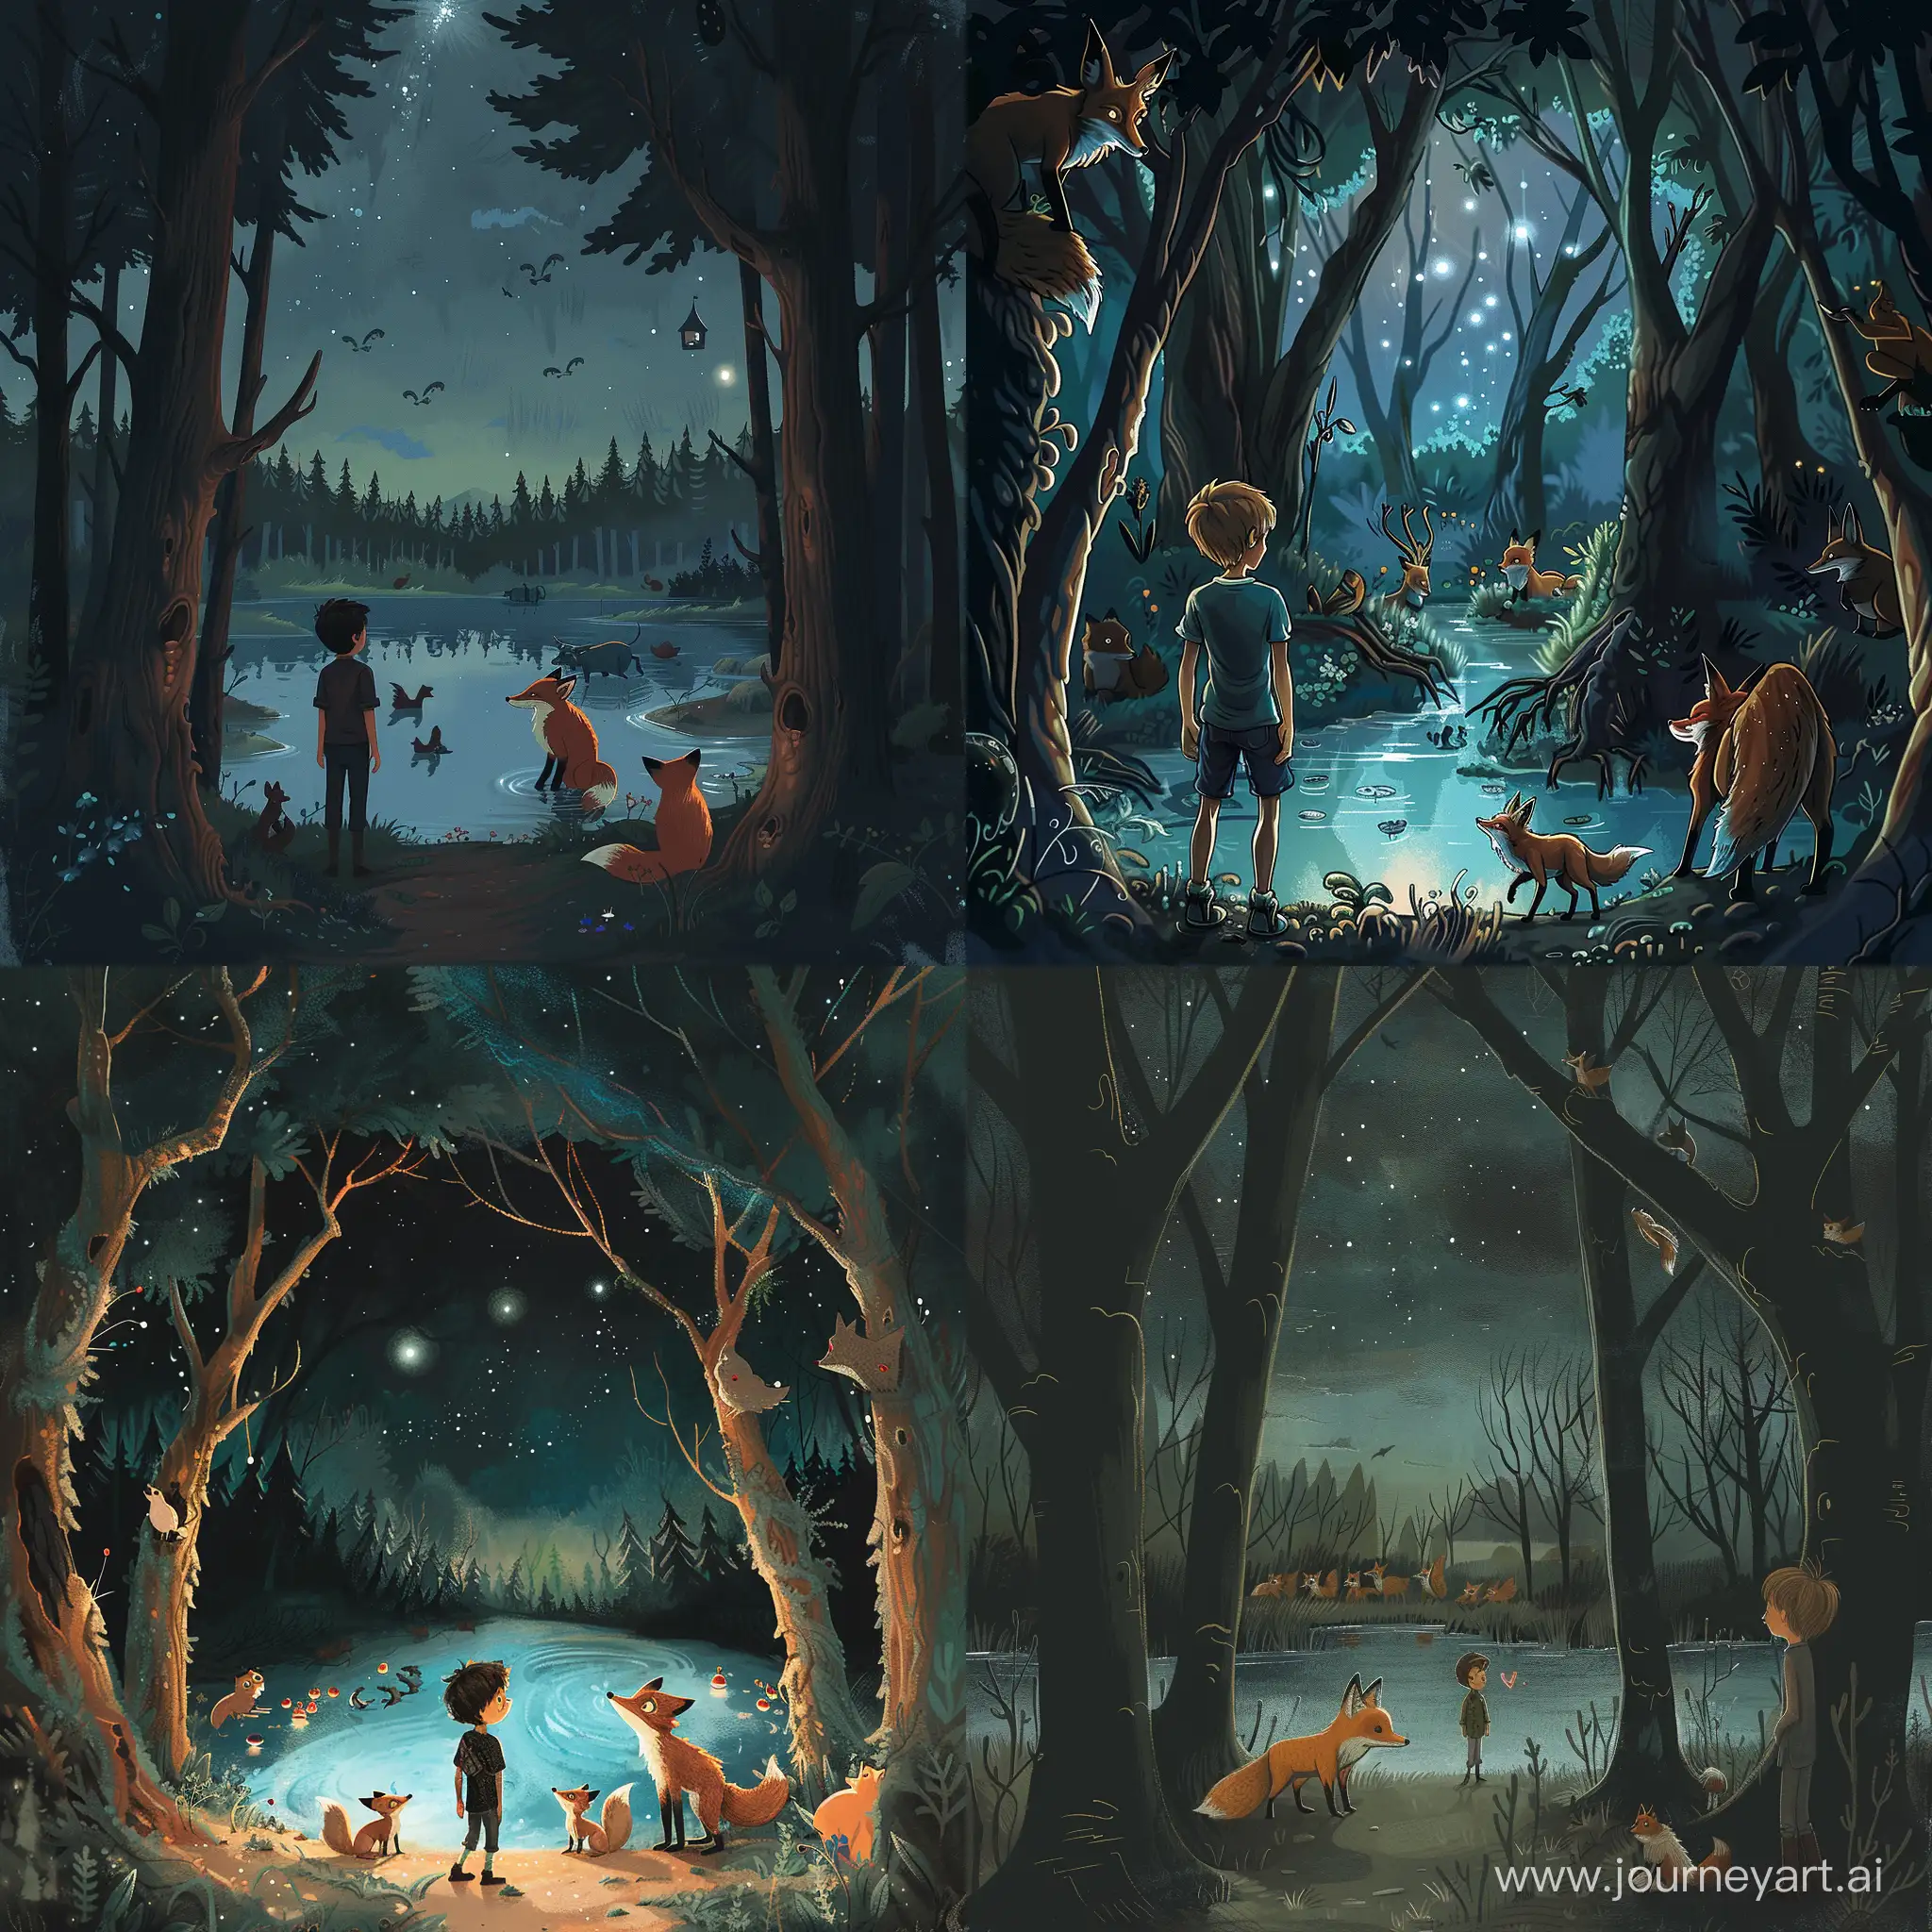 Teenage boy stands at the edge of a dark forest, walks through scary-looking trees, comes across a clearing, beautiful lake with woodland creatures, talks to a fox, fox tells him about the magic of the forest, it starts to get dark, boy and fox look up at the stars